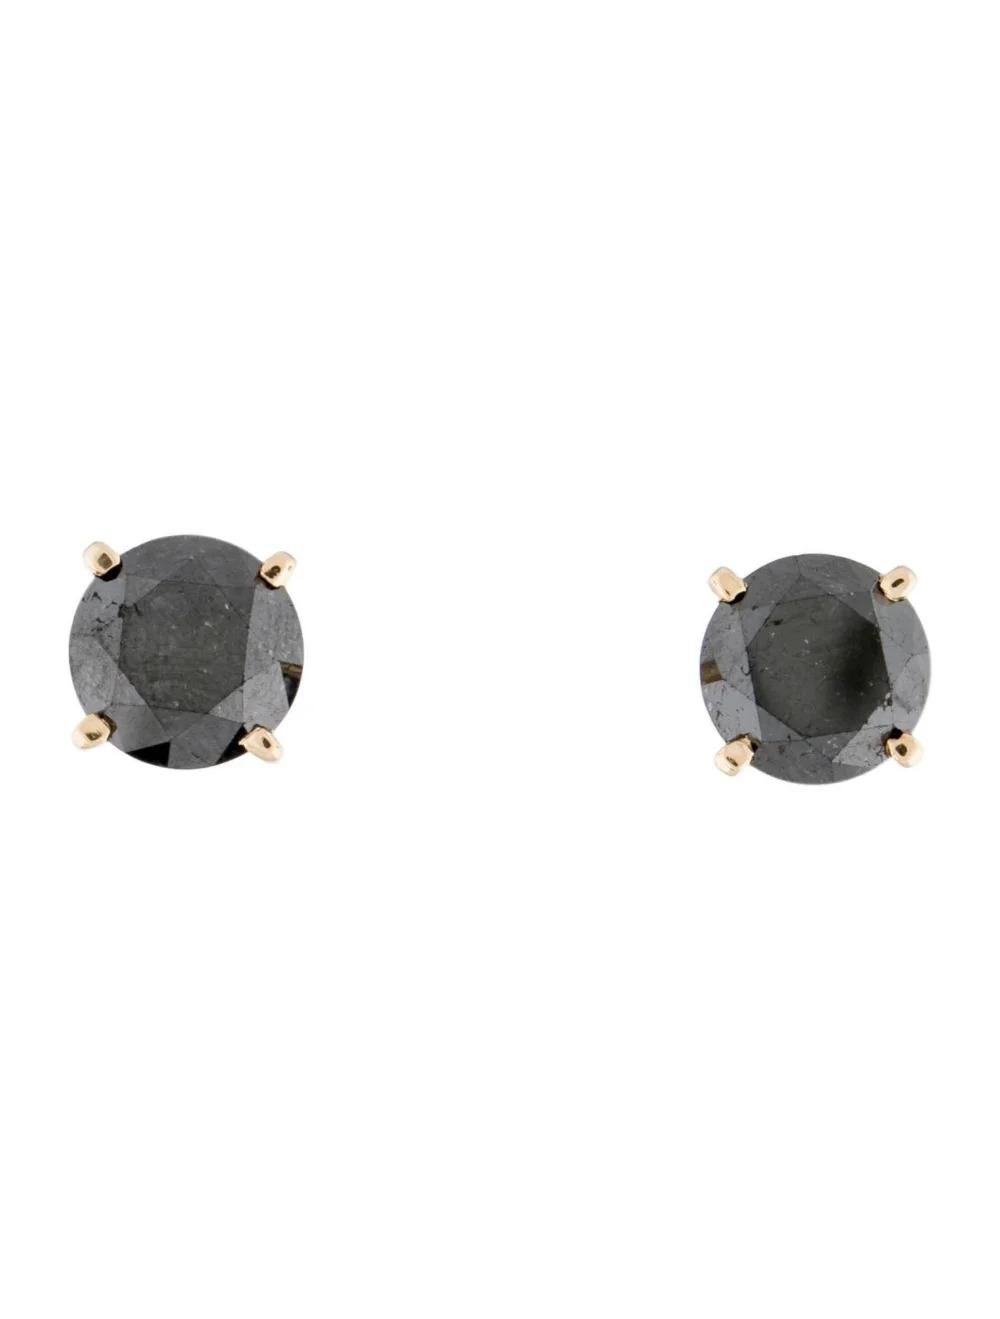 Elevate your style with these exquisite 14K Yellow Gold Diamond Stud Earrings, featuring a captivating total carat weight of 6.59. Crafted to perfection, these earrings exude timeless elegance and sophistication. Each earring showcases a stunning